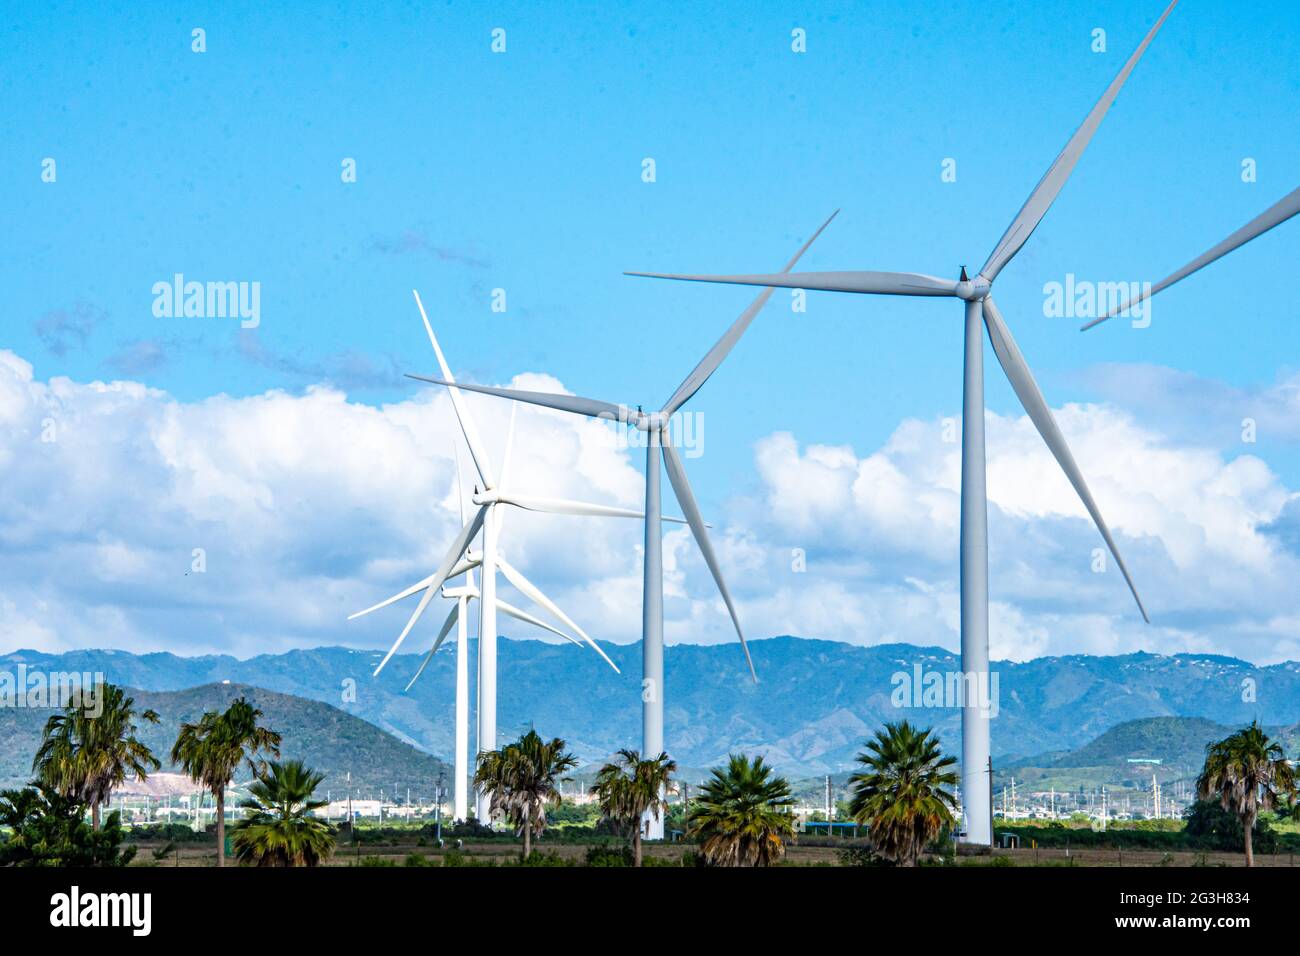 A wind farm generating clean, renewable energy. Copy space. Stock Photo